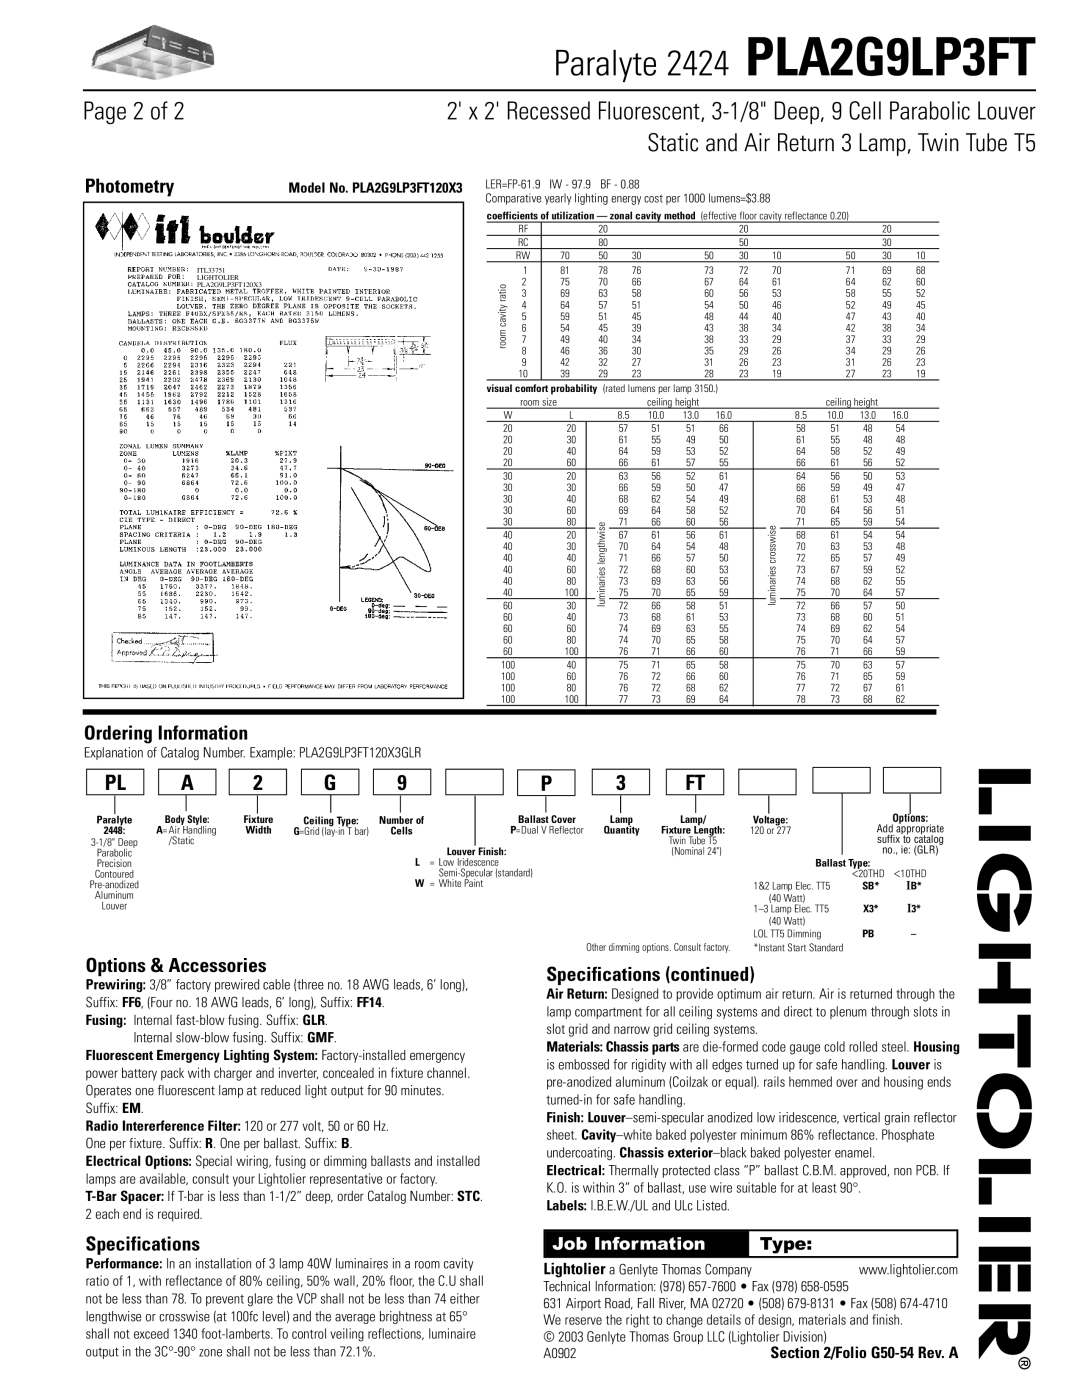 Lightolier PLA2G9LP3FT Page 2 of, Photometry, Ordering Information, Options & Accessories, Specifications continued, Type 